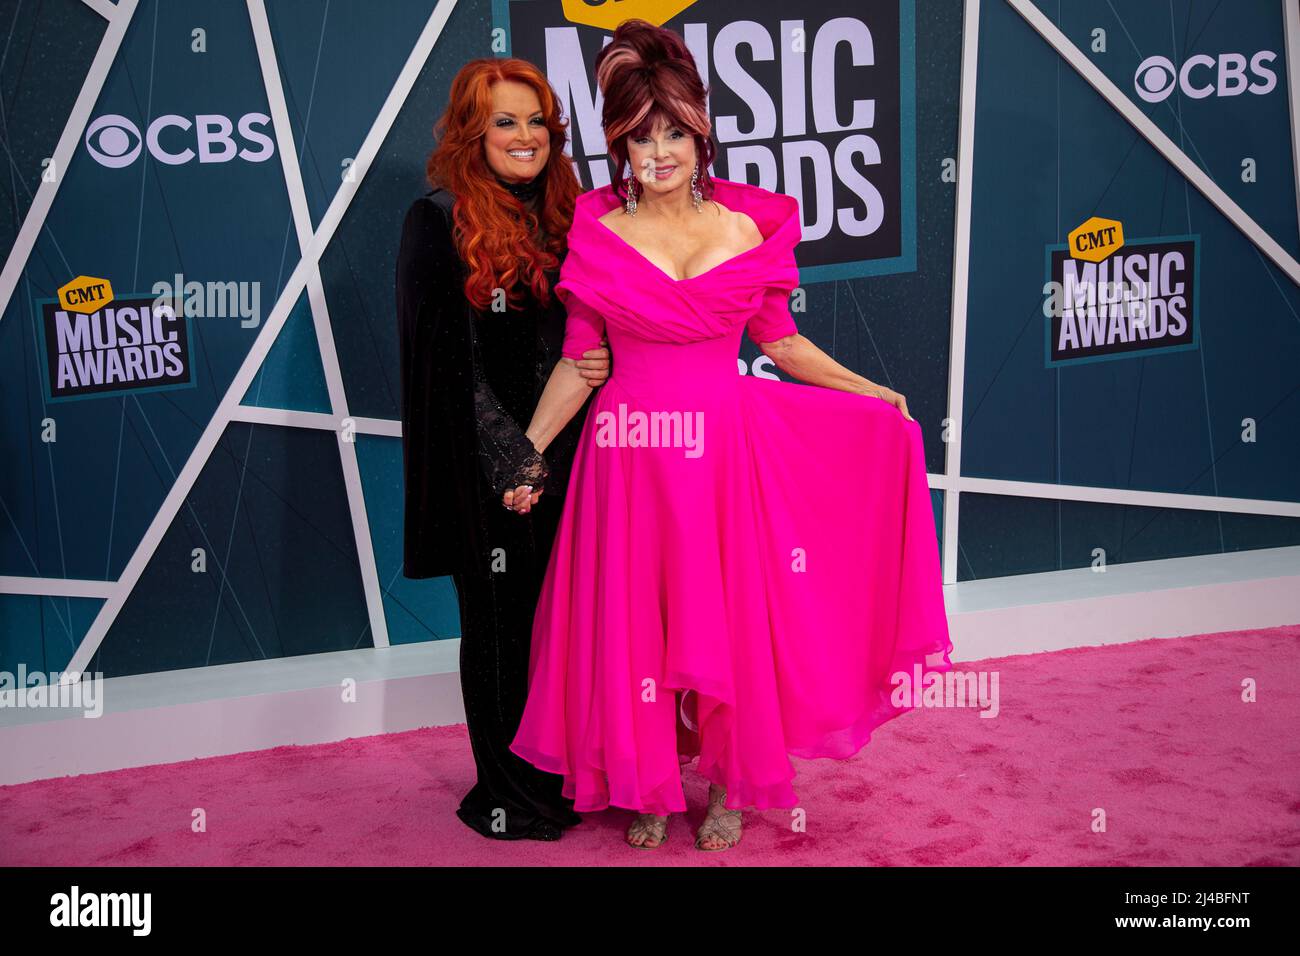 Nashville, Tenn. - April 11, 2022 The Judds, Wynonna and Naomi, arrive at the red carpet for the 2022 CMT Awards on April 11, 2022 at Municipal Auditorium in Nashville, Tenn. Credit: Jamie Gilliam/The Photo Access Stock Photo